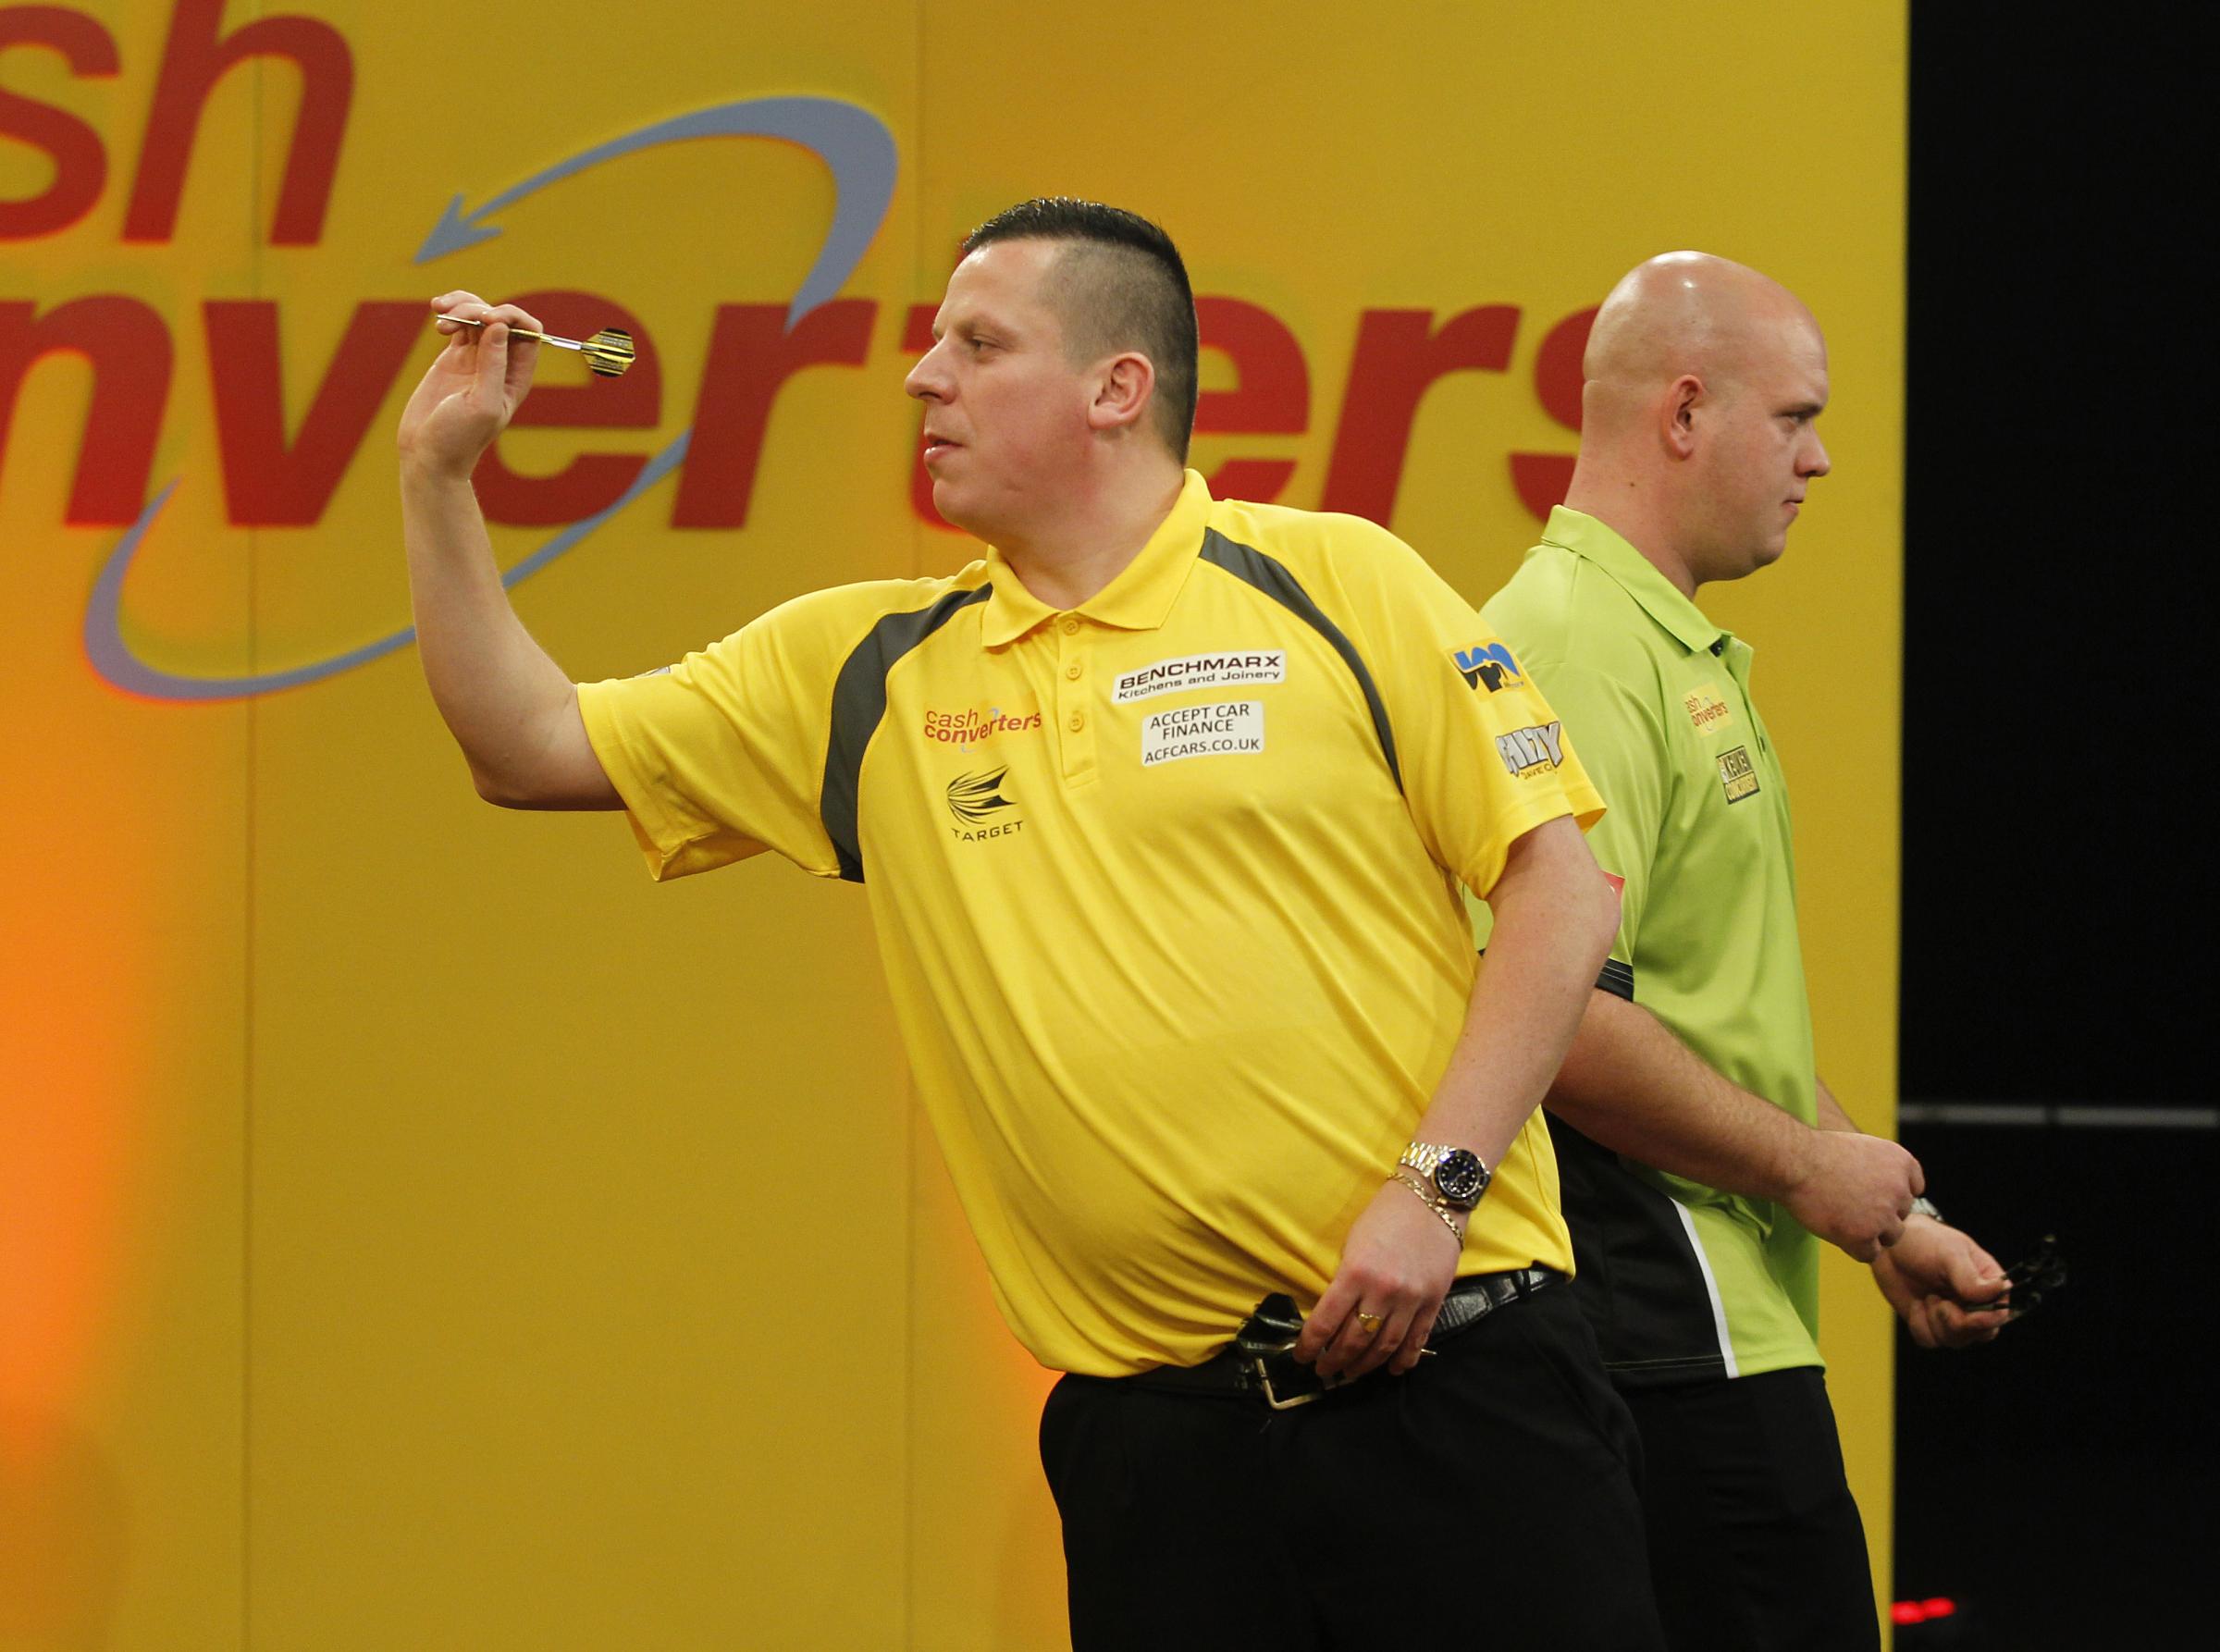 Chizzy confident as St Helens darts trio get set for World Championship - St Helens Star